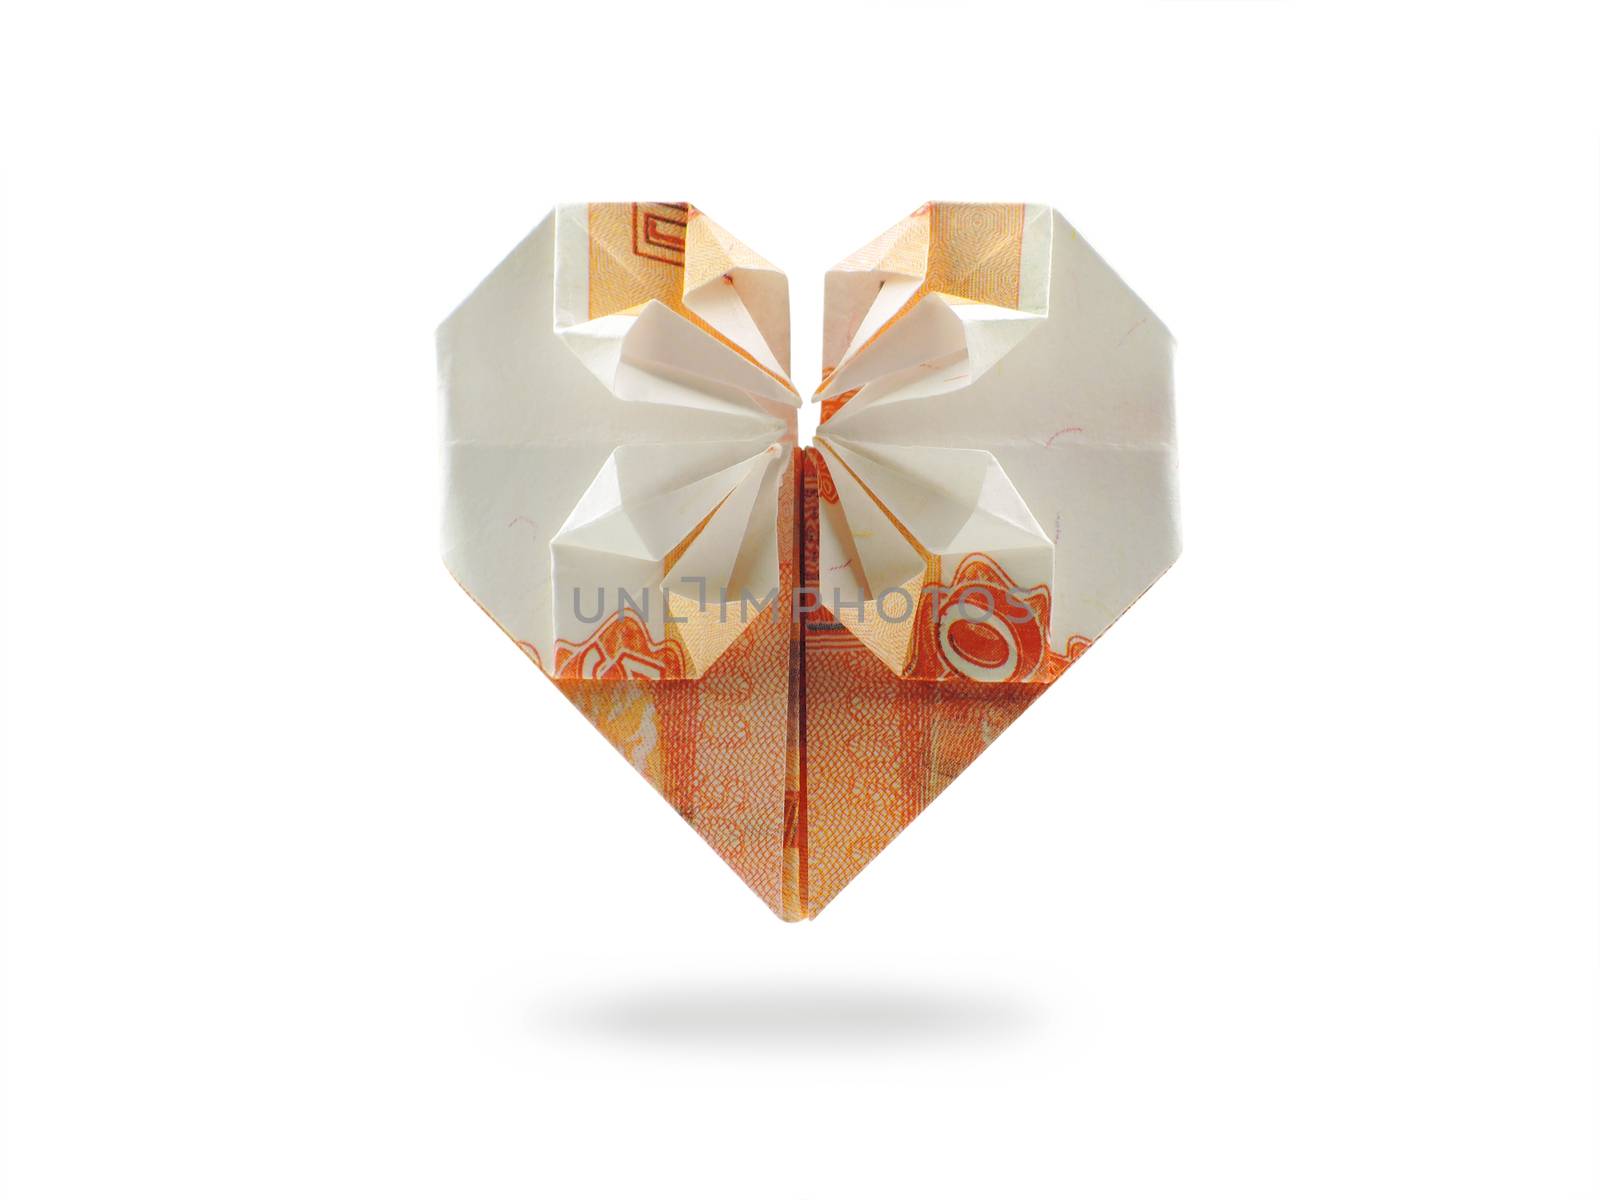 origami heart of five thousand ruble banknote by butenkow